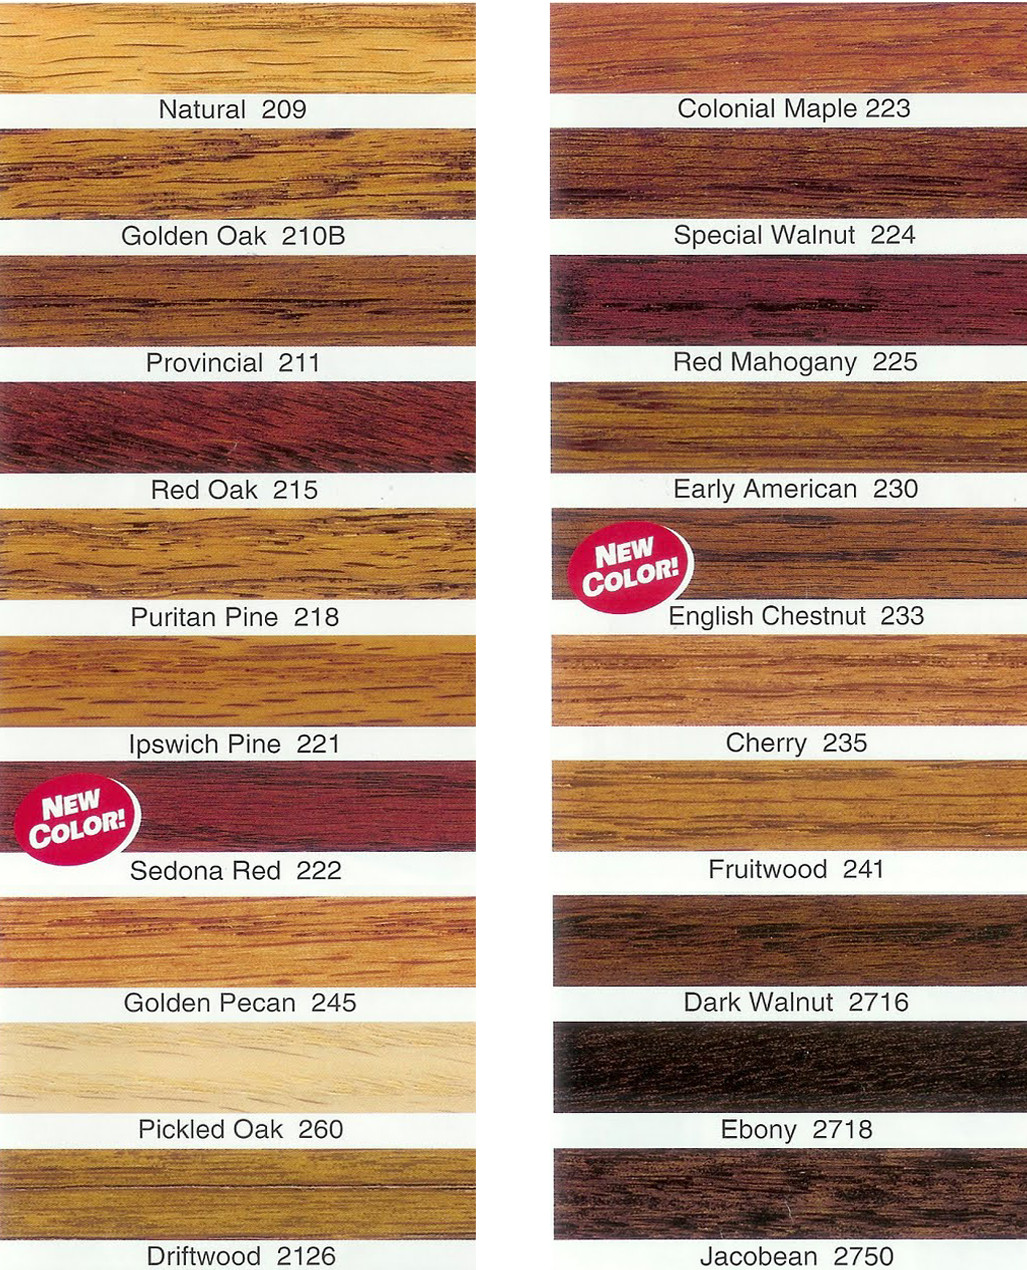 lowes hardwood floor stain of picture cedar wood stain related keywords suggestions cedar wood within gallant wood